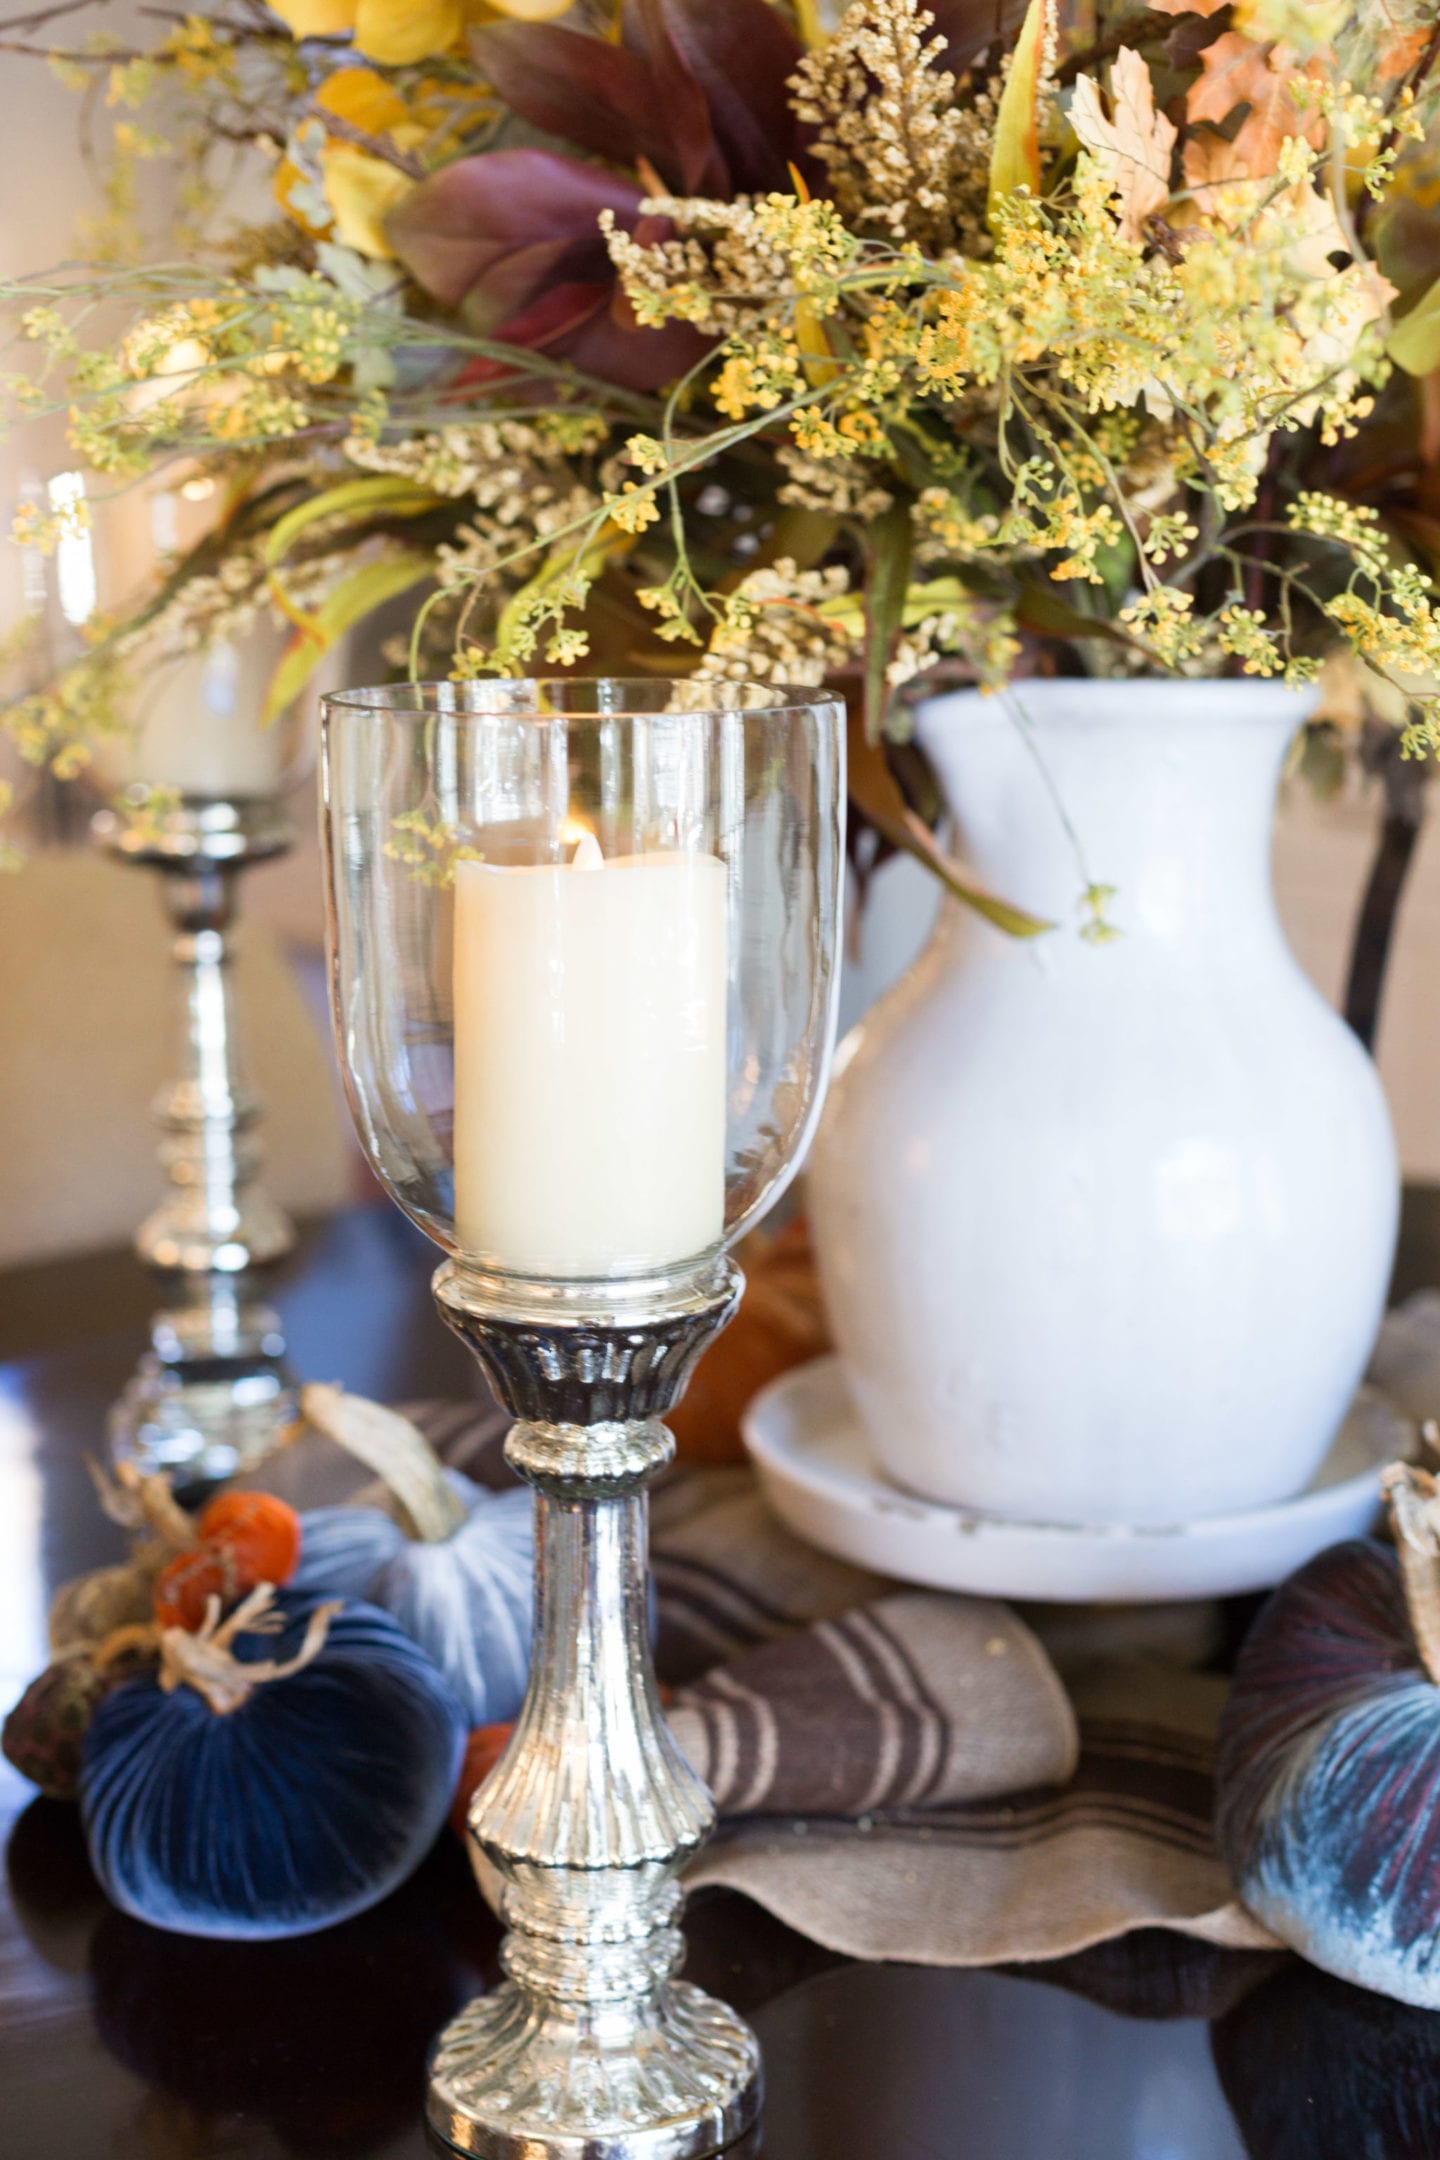 Mercury Glass Candlestick with fake candlelight. An elegant and rustic fall centerpiece made of autumn flower arrangements! This is a great silk flower arrangements for dining room table.